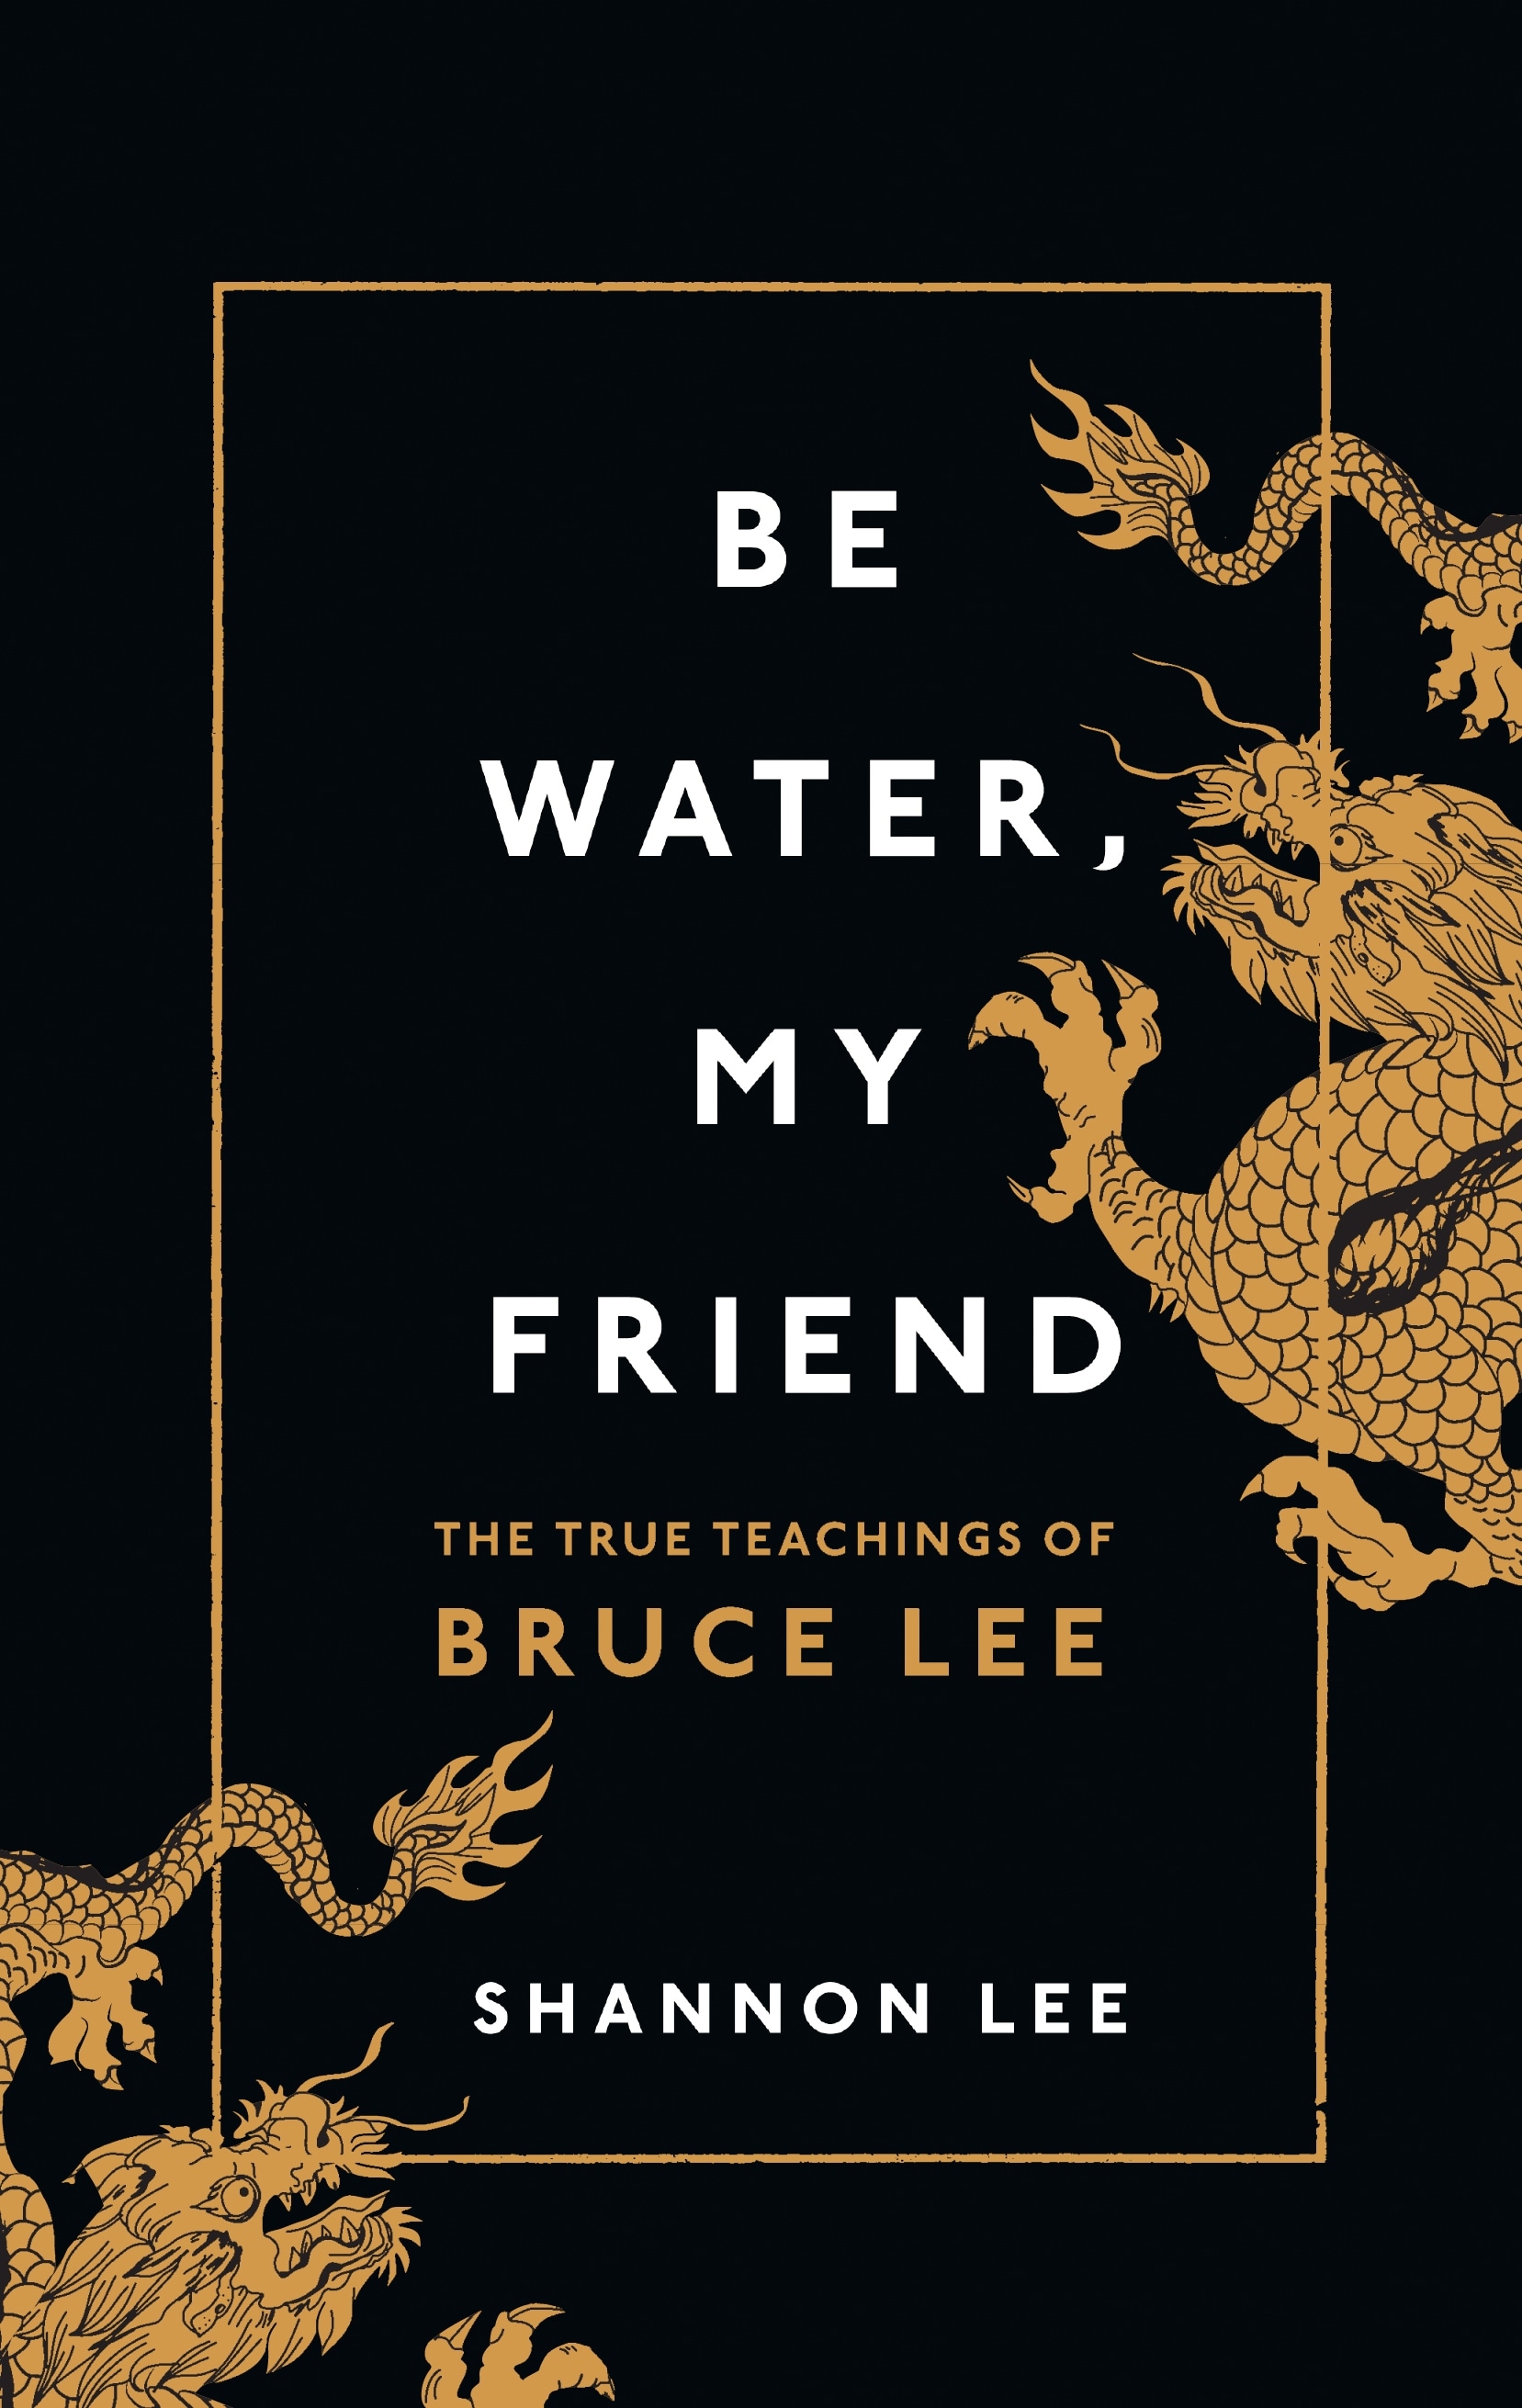 Book “Be Water, My Friend” by Shannon Lee — October 8, 2020